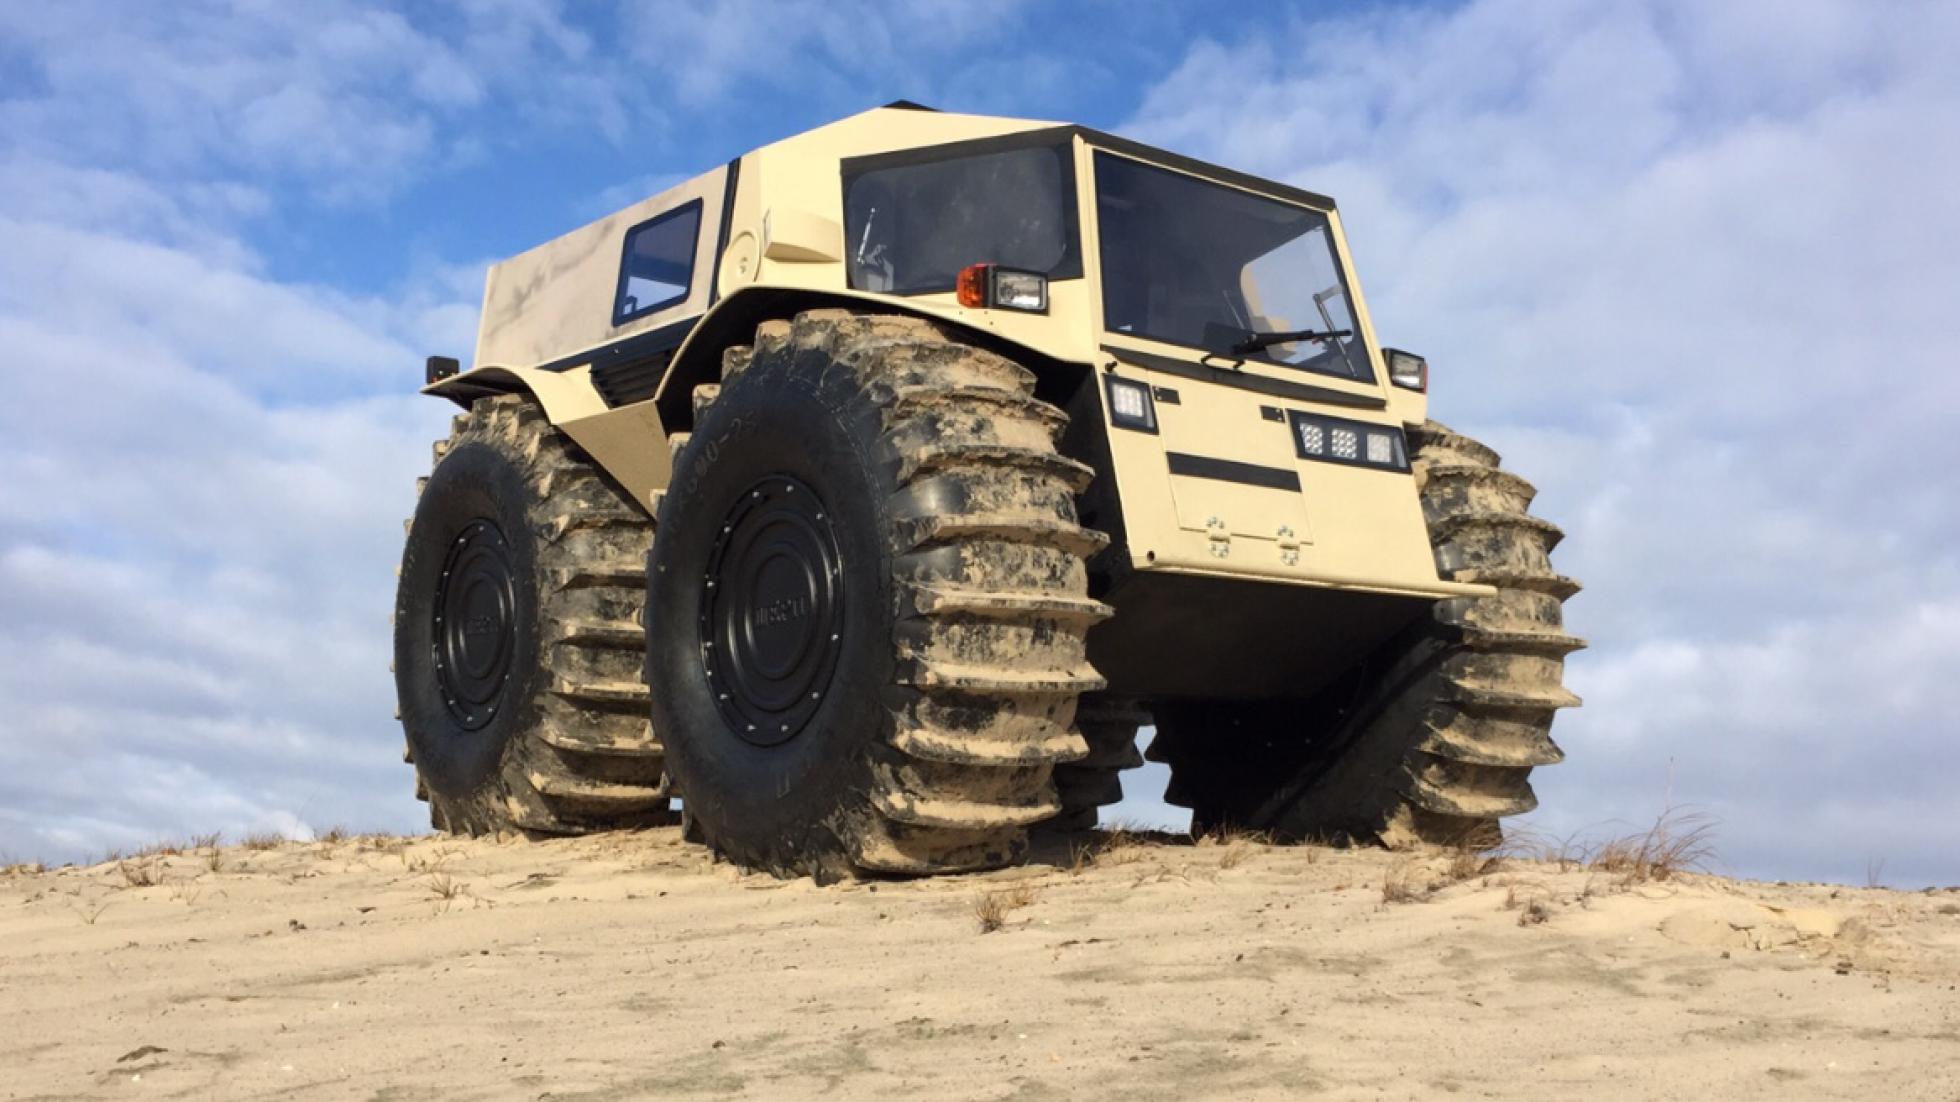 Russian Off Road Vehicles That You Haven't Heard Of - sherp